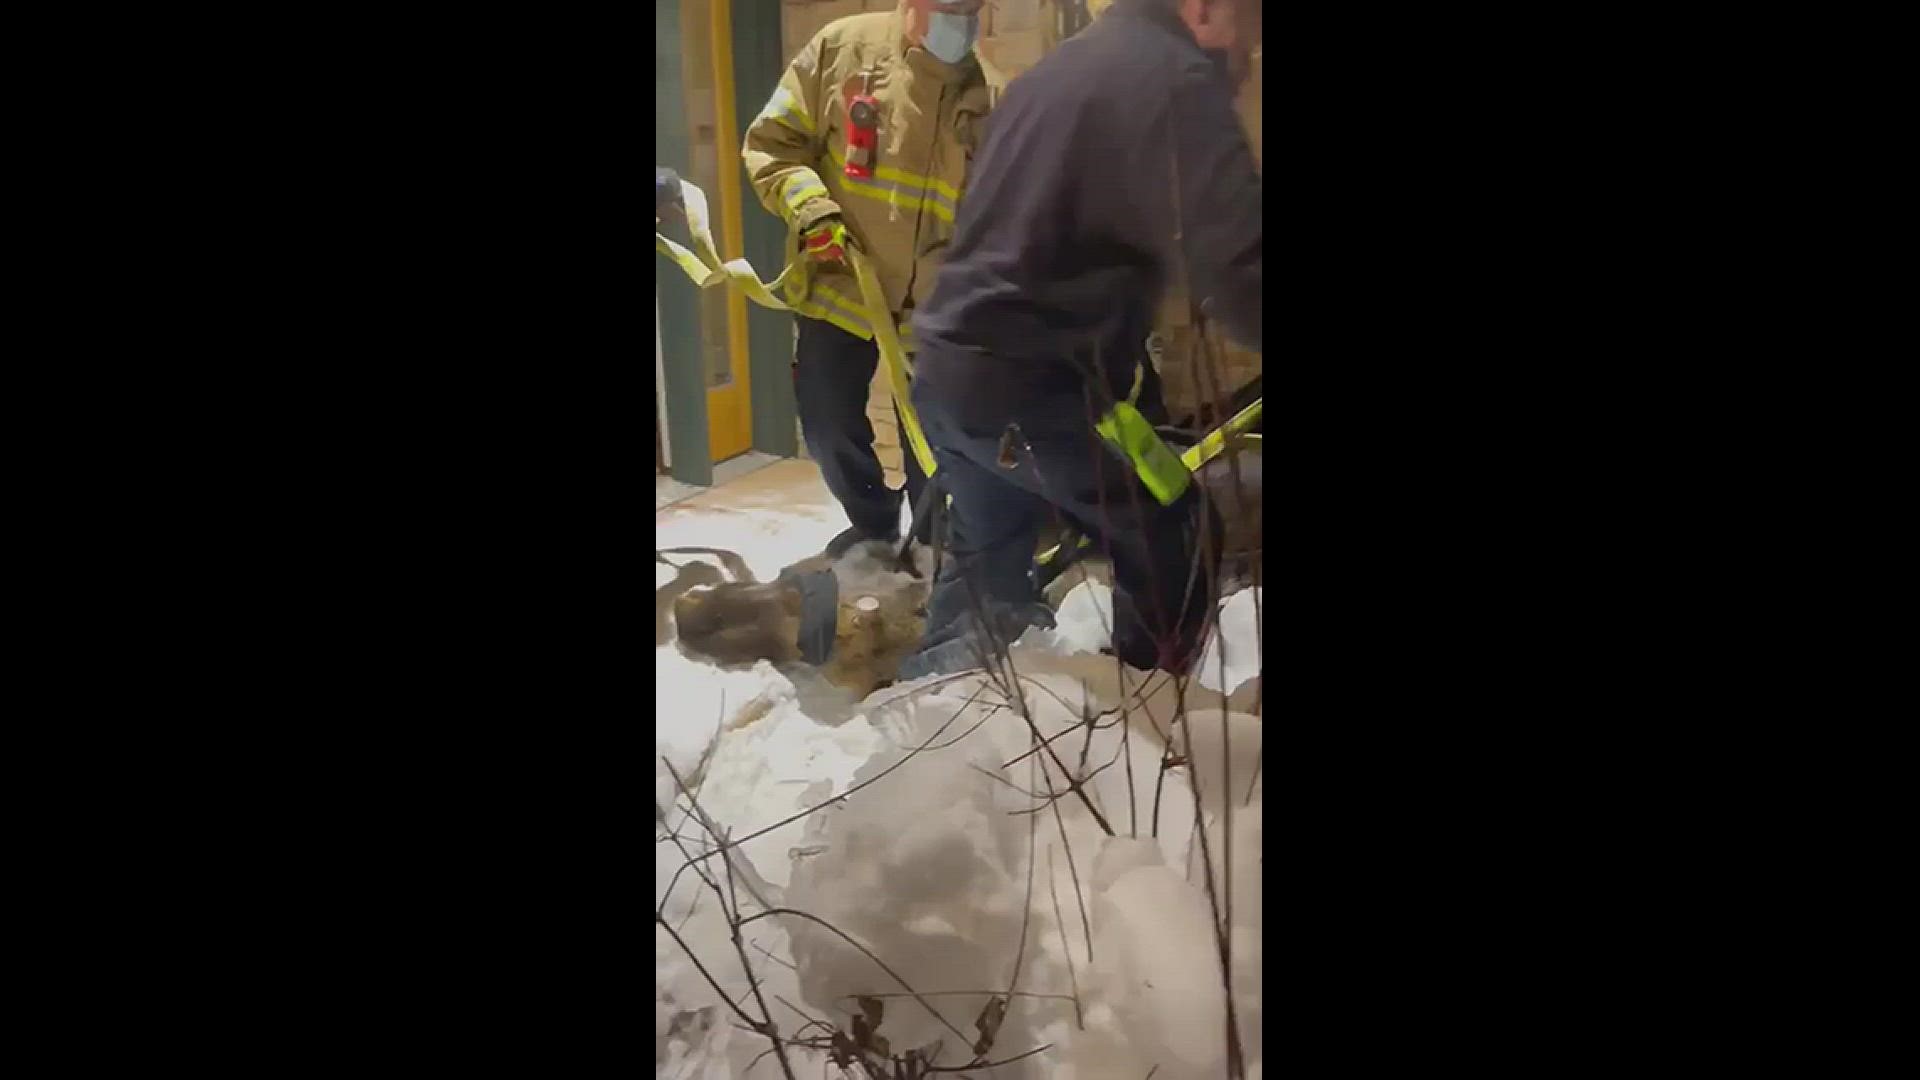 Noreen Galaba shared this video with 9NEWS after a moose was freed from her basement in Breckenridge.